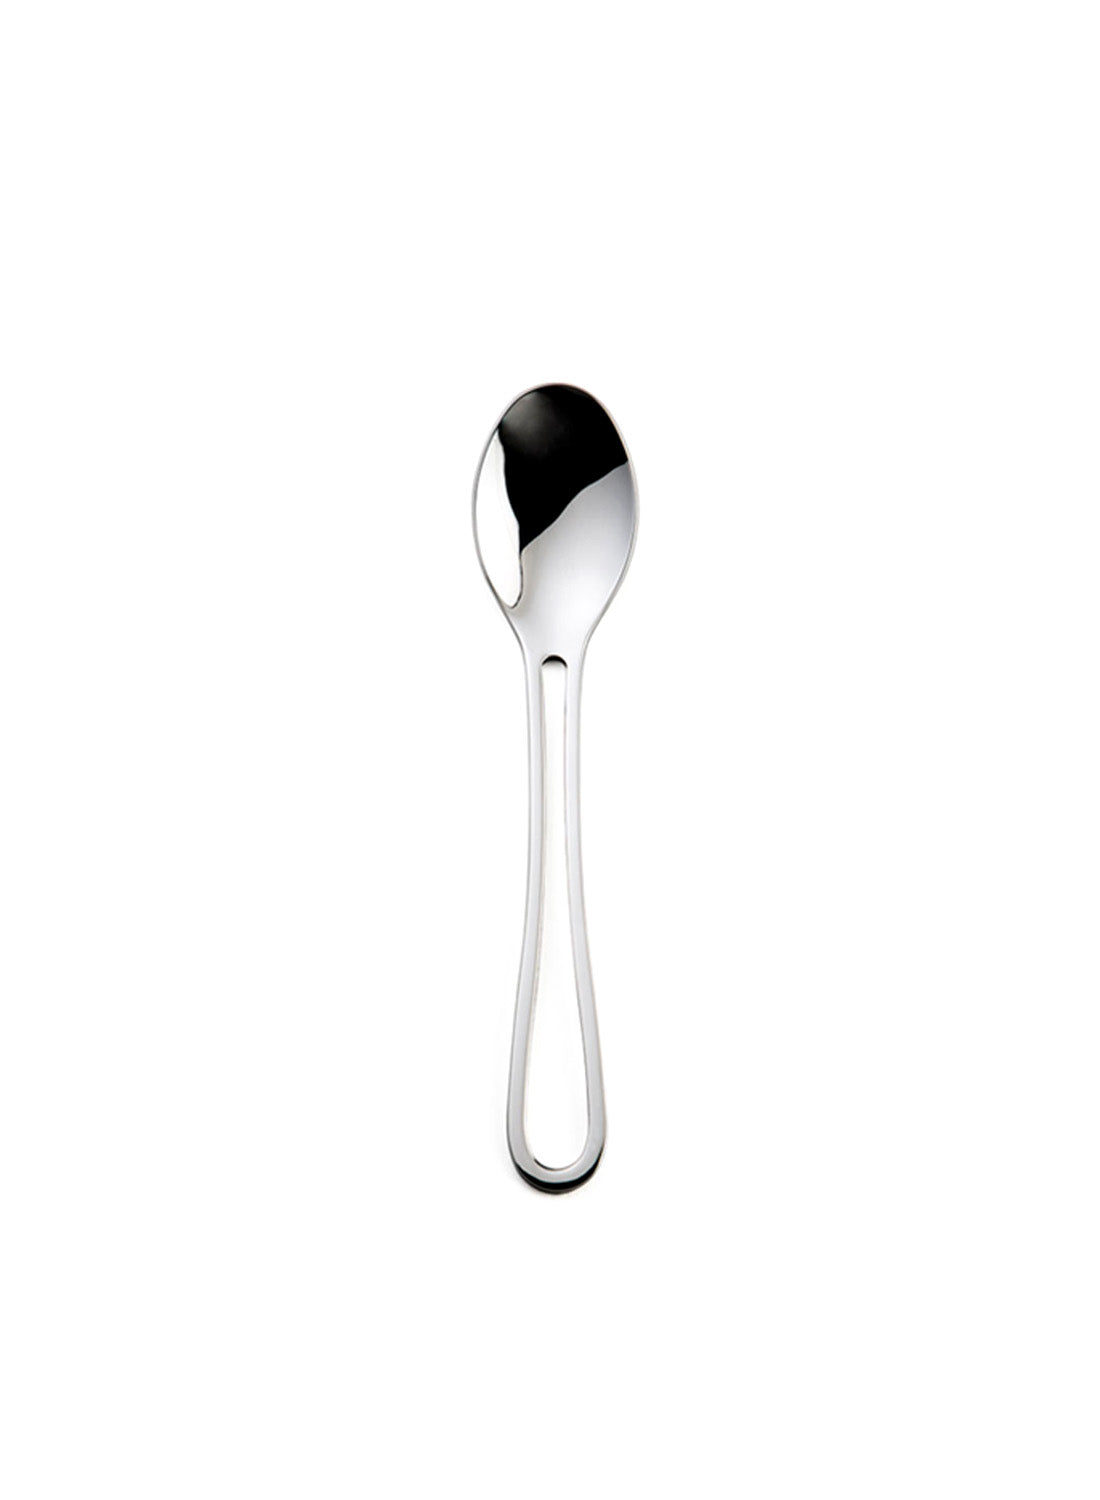 Maarten Baptist Outline Table Spoon - Polished Stainless Steel